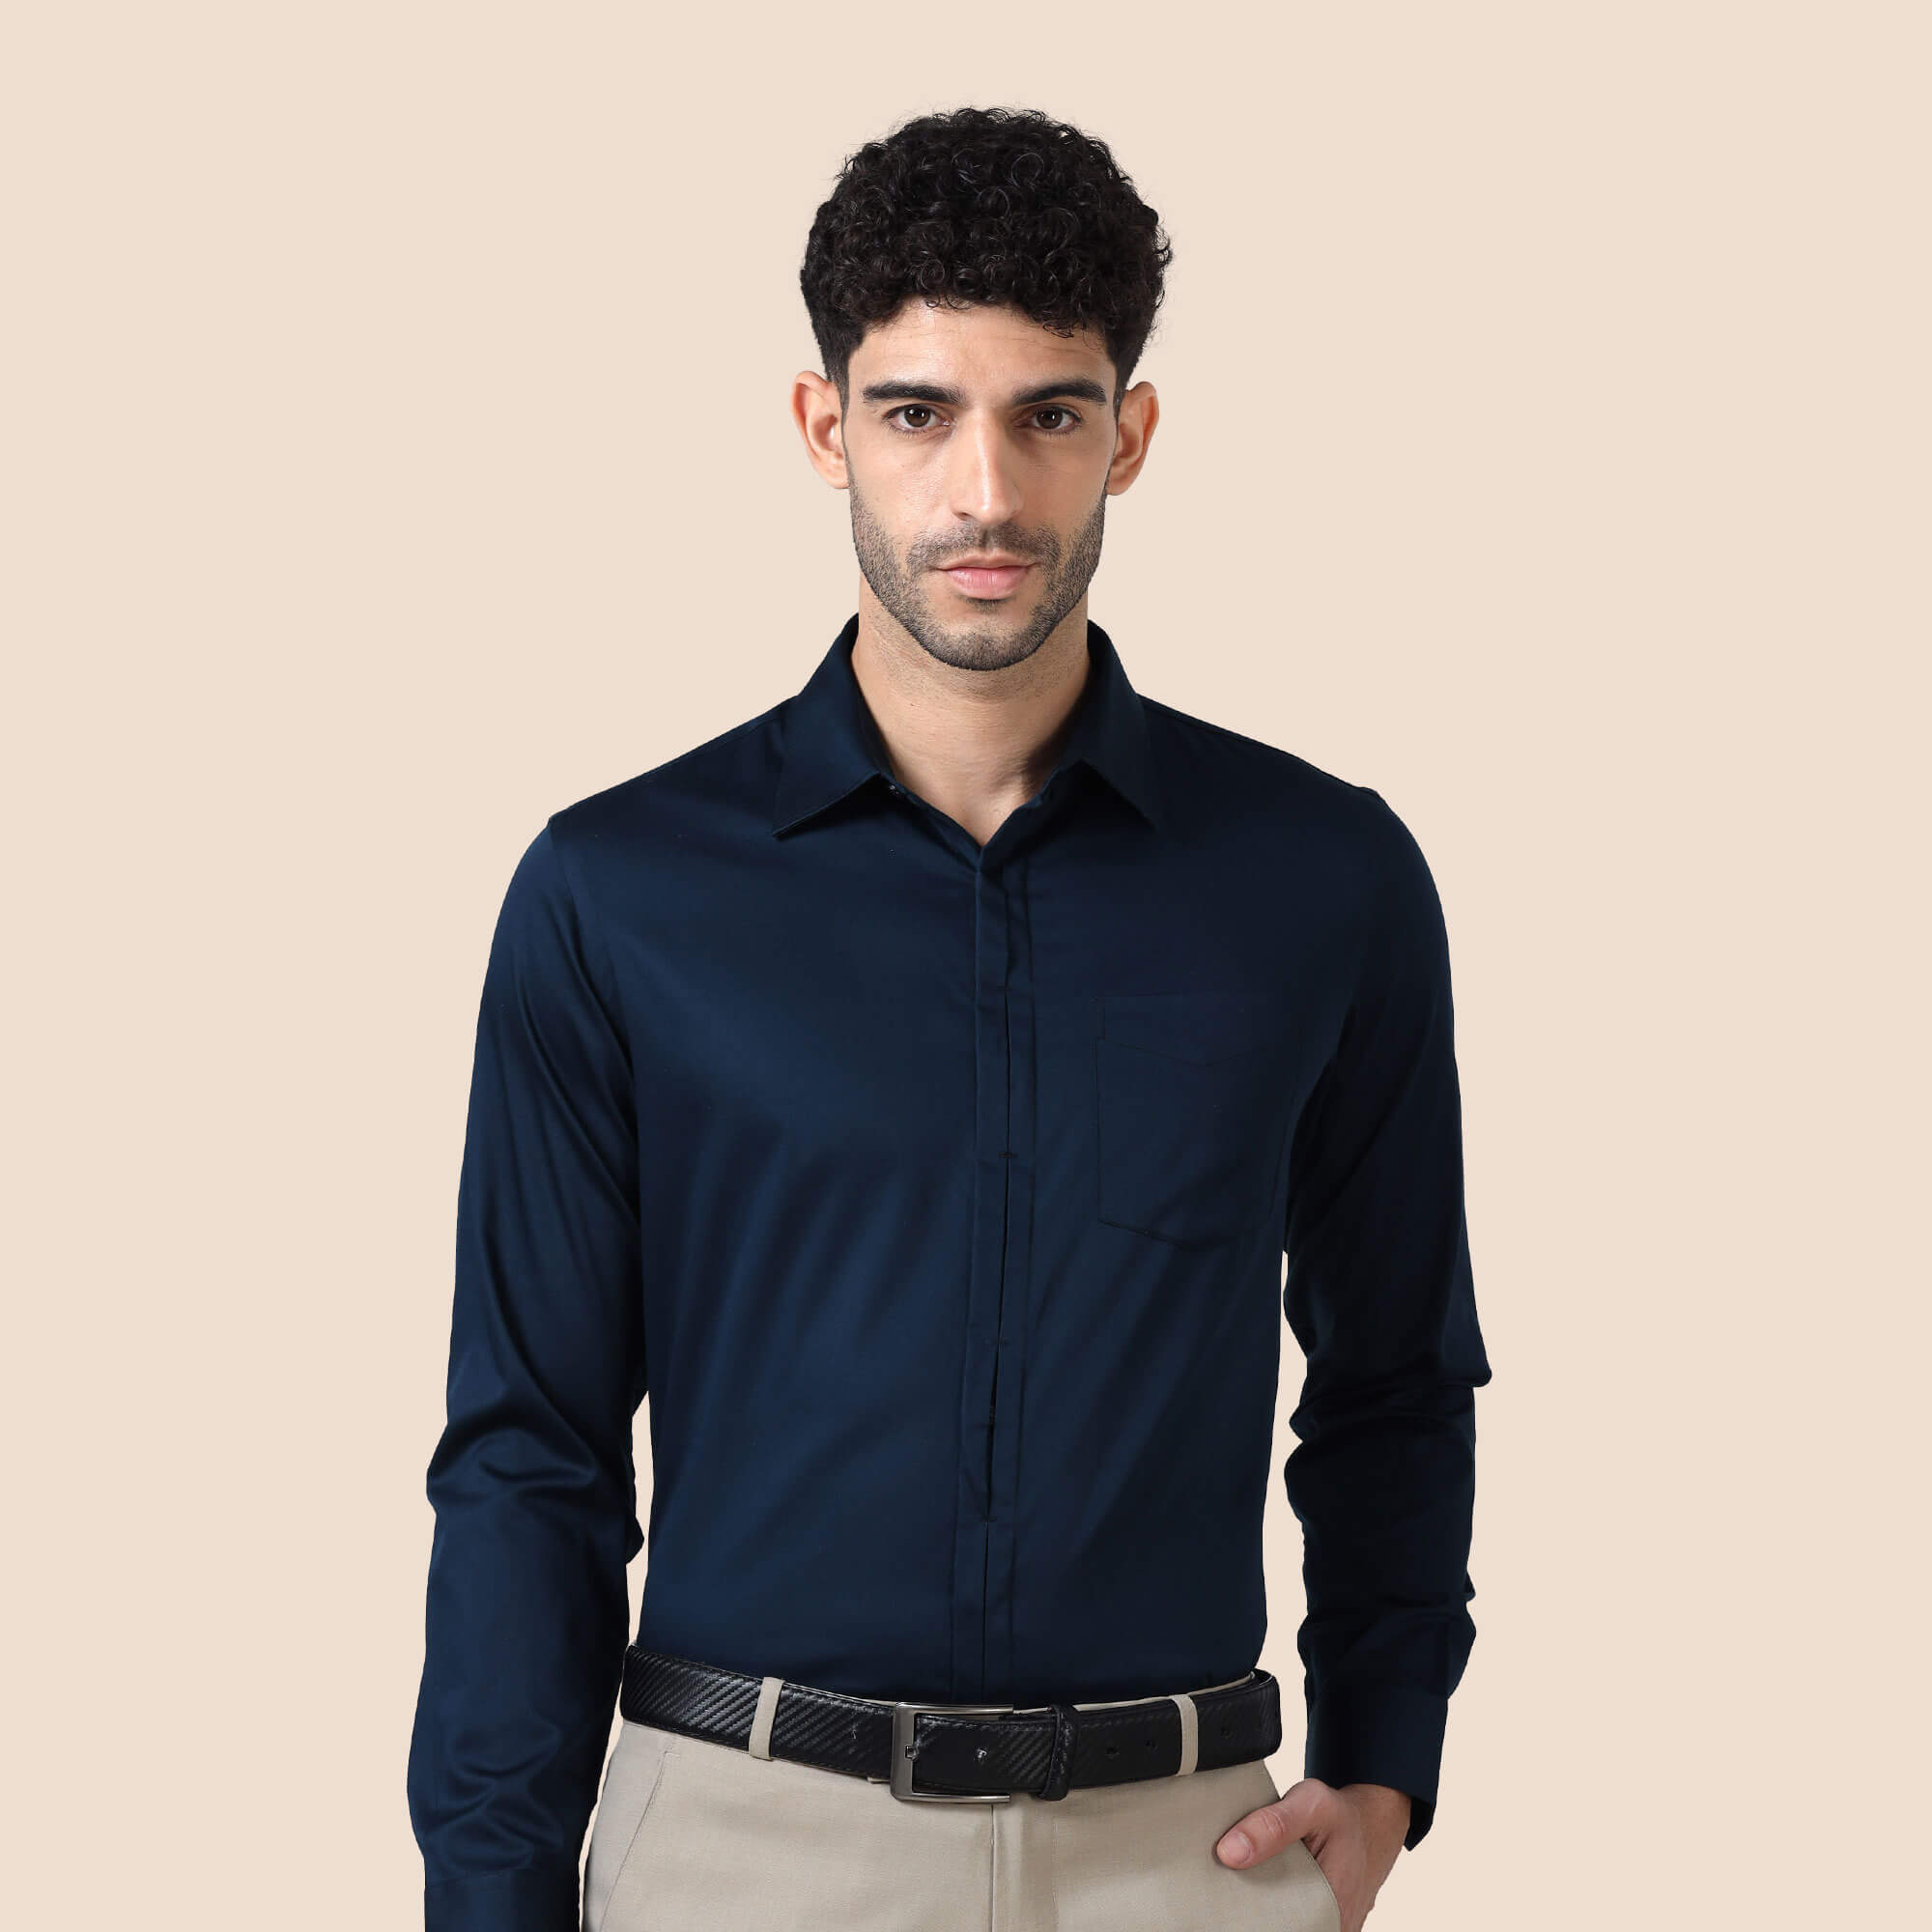 Alfred Navy With Signature  Placket